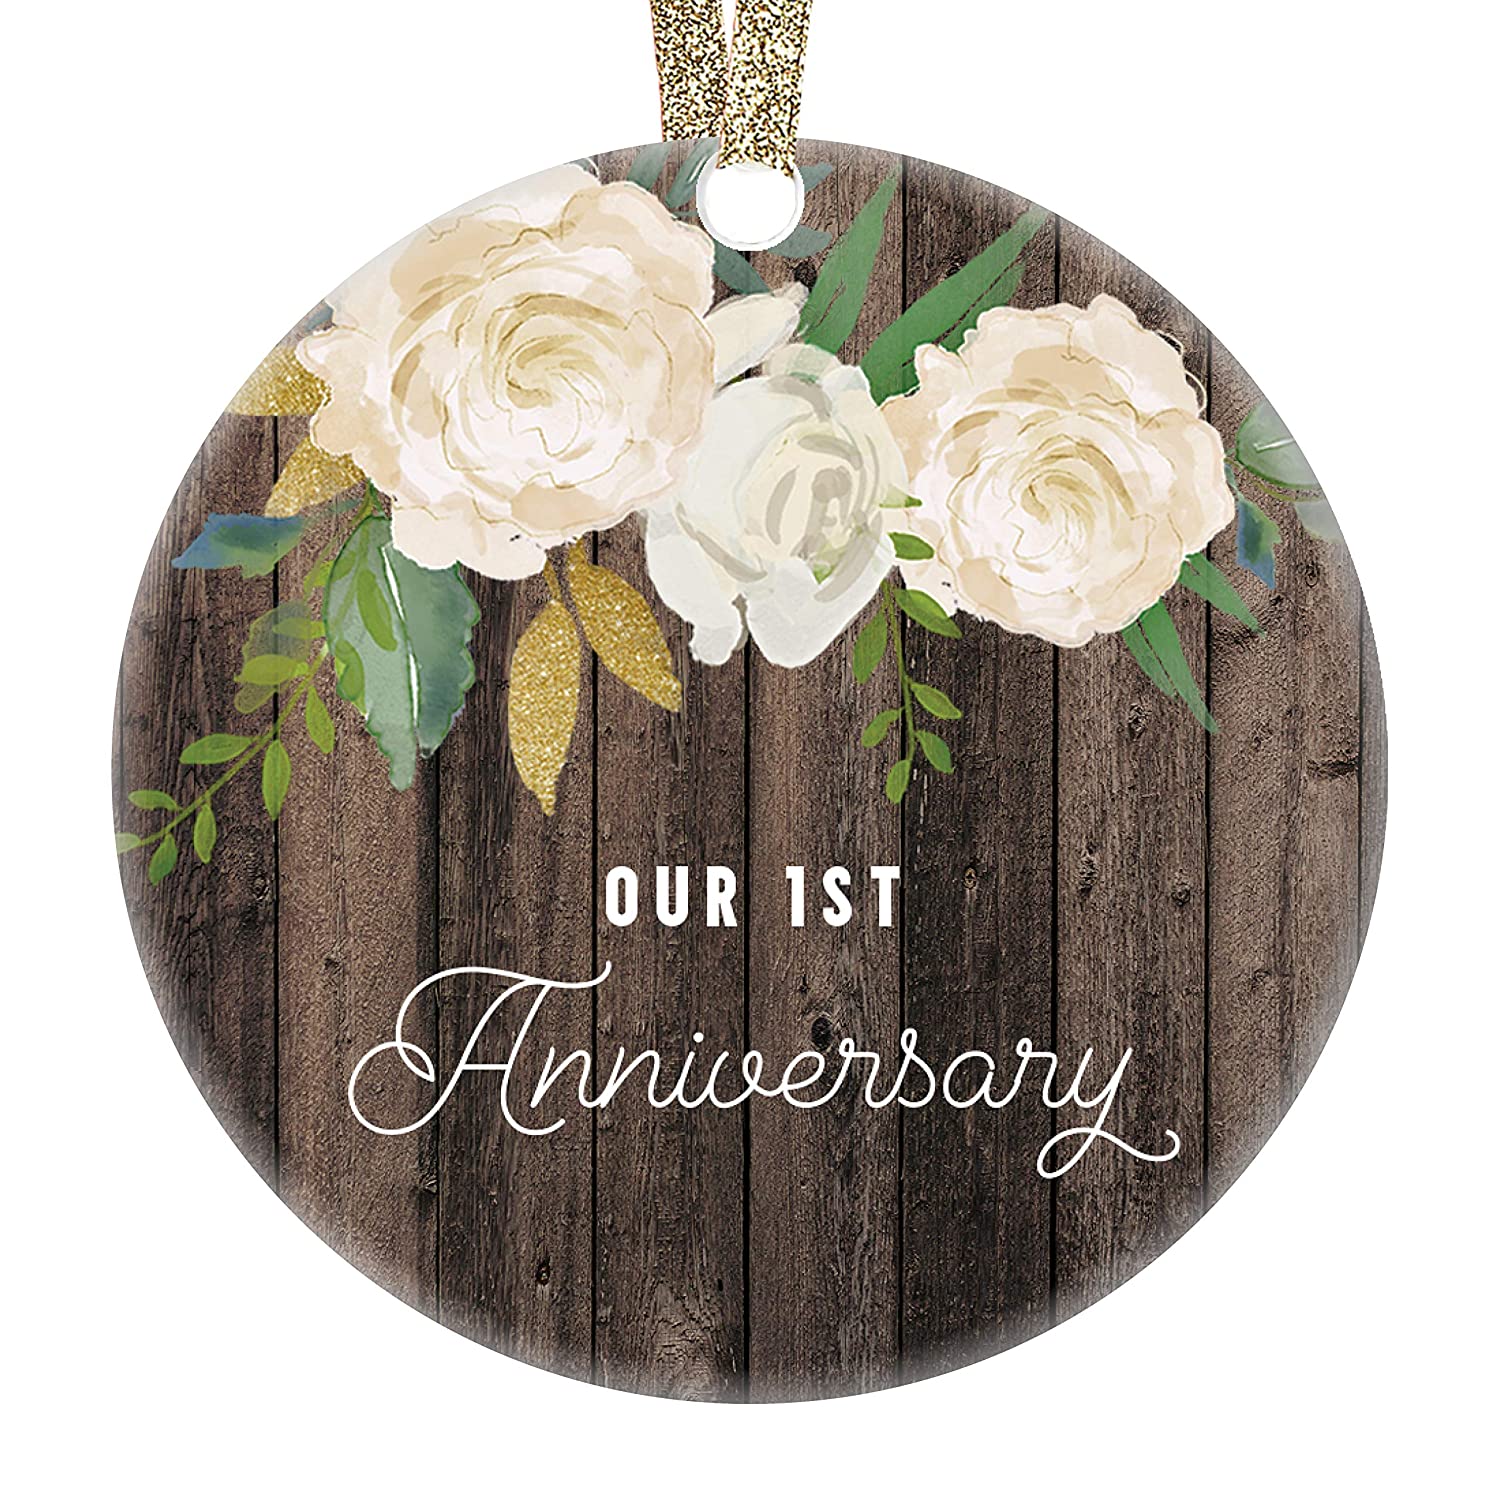 1st Year Anniversary Gifts First Christmas Married Ornament Newlywed Wedding Marriage Couple Him Her Keepsake Rustic 3 Flat Circle Porcelain Ceramic